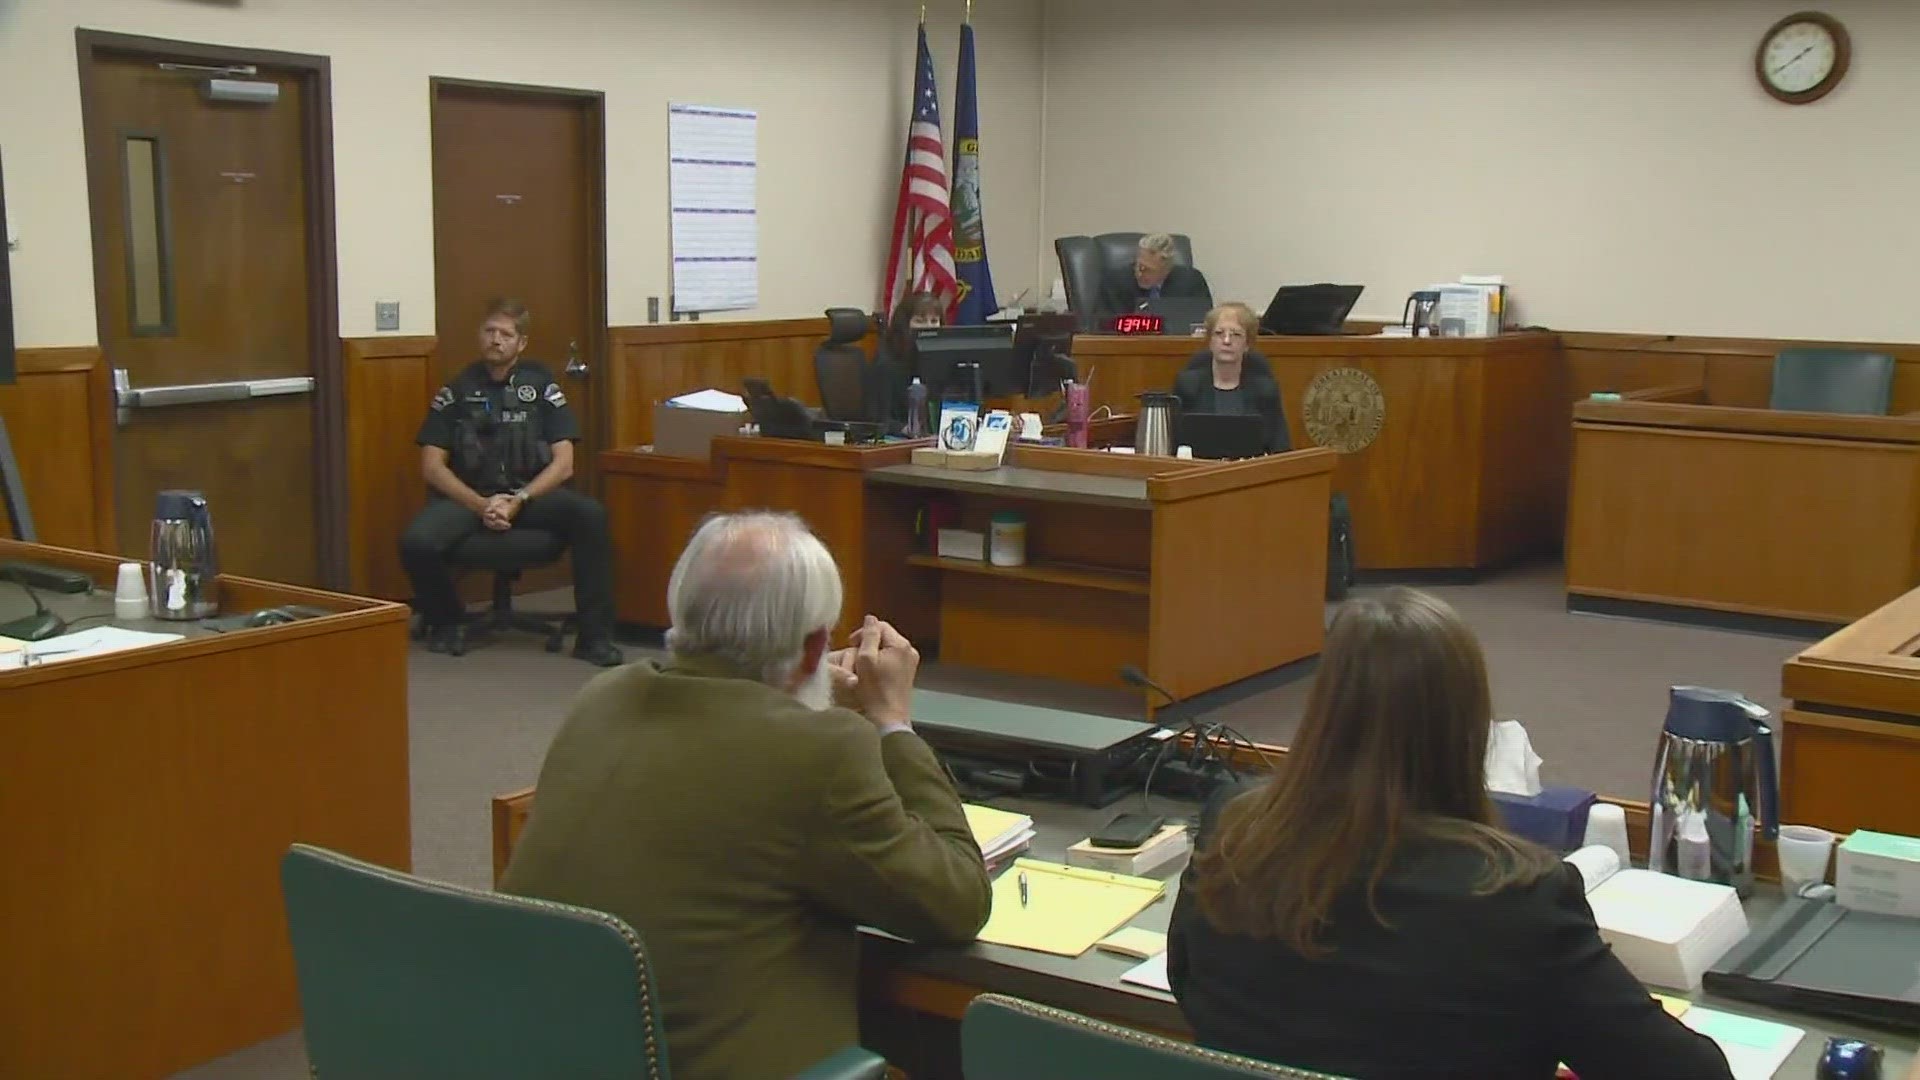 The judge is considering two motions from Kohberger's defense that could delay the start of the trial for the murders of four University of Idaho students.